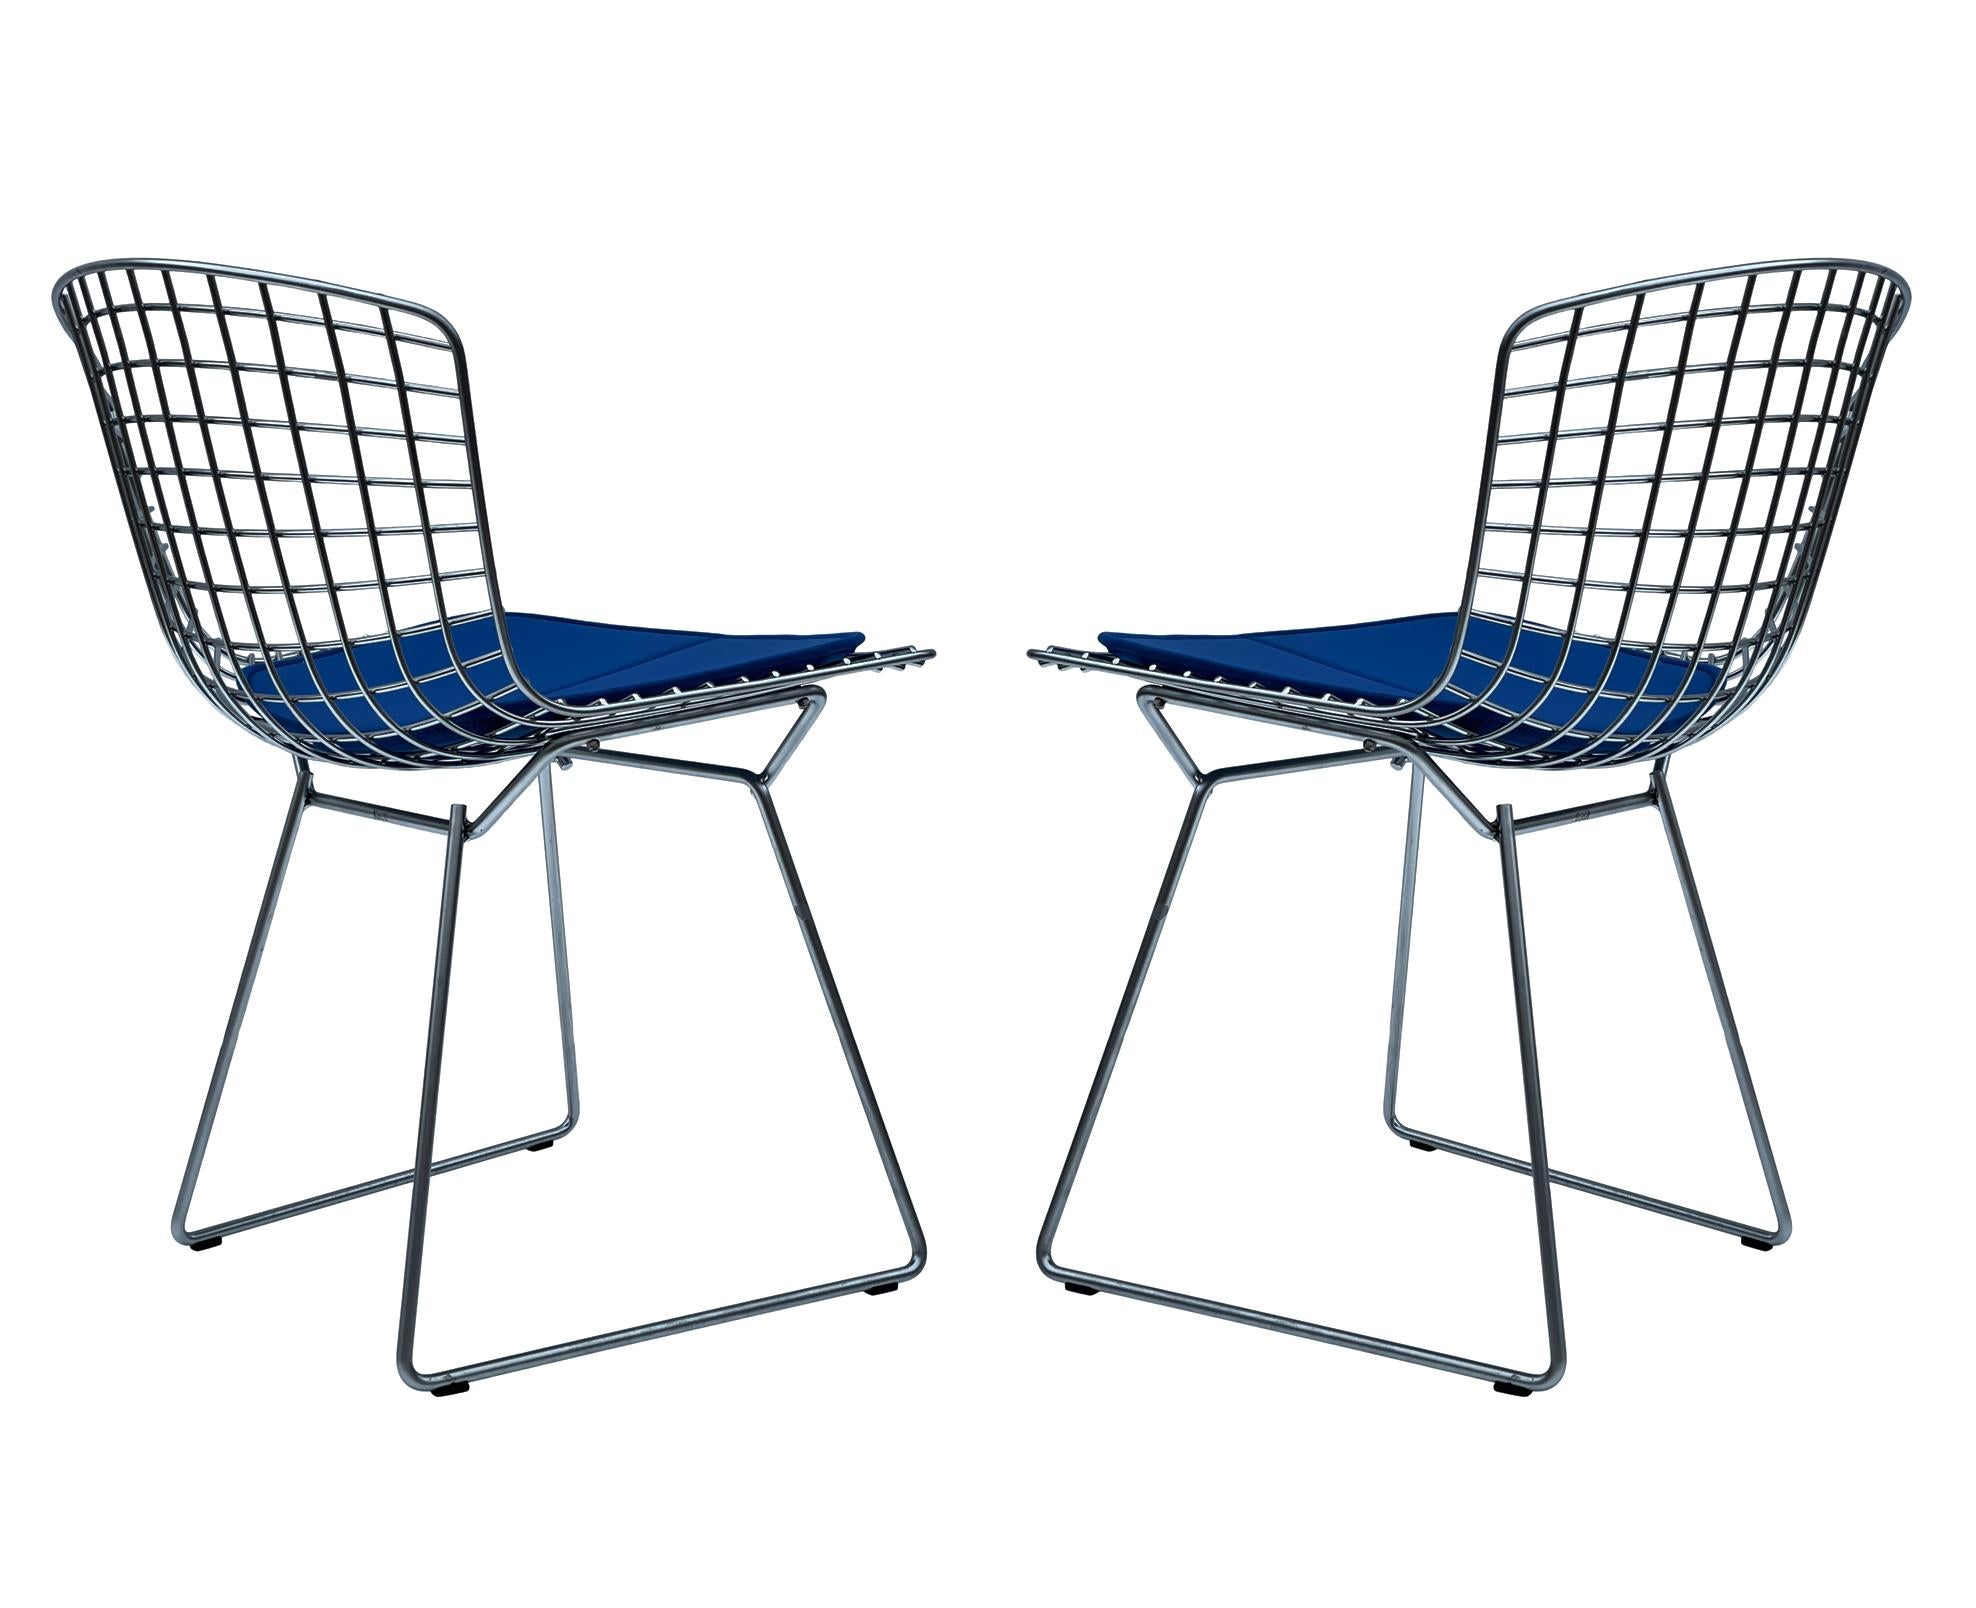 Late 20th Century Pair of Mid-Century Modern Wire Side or Dining Chairs by Harry Bertoia for Knoll